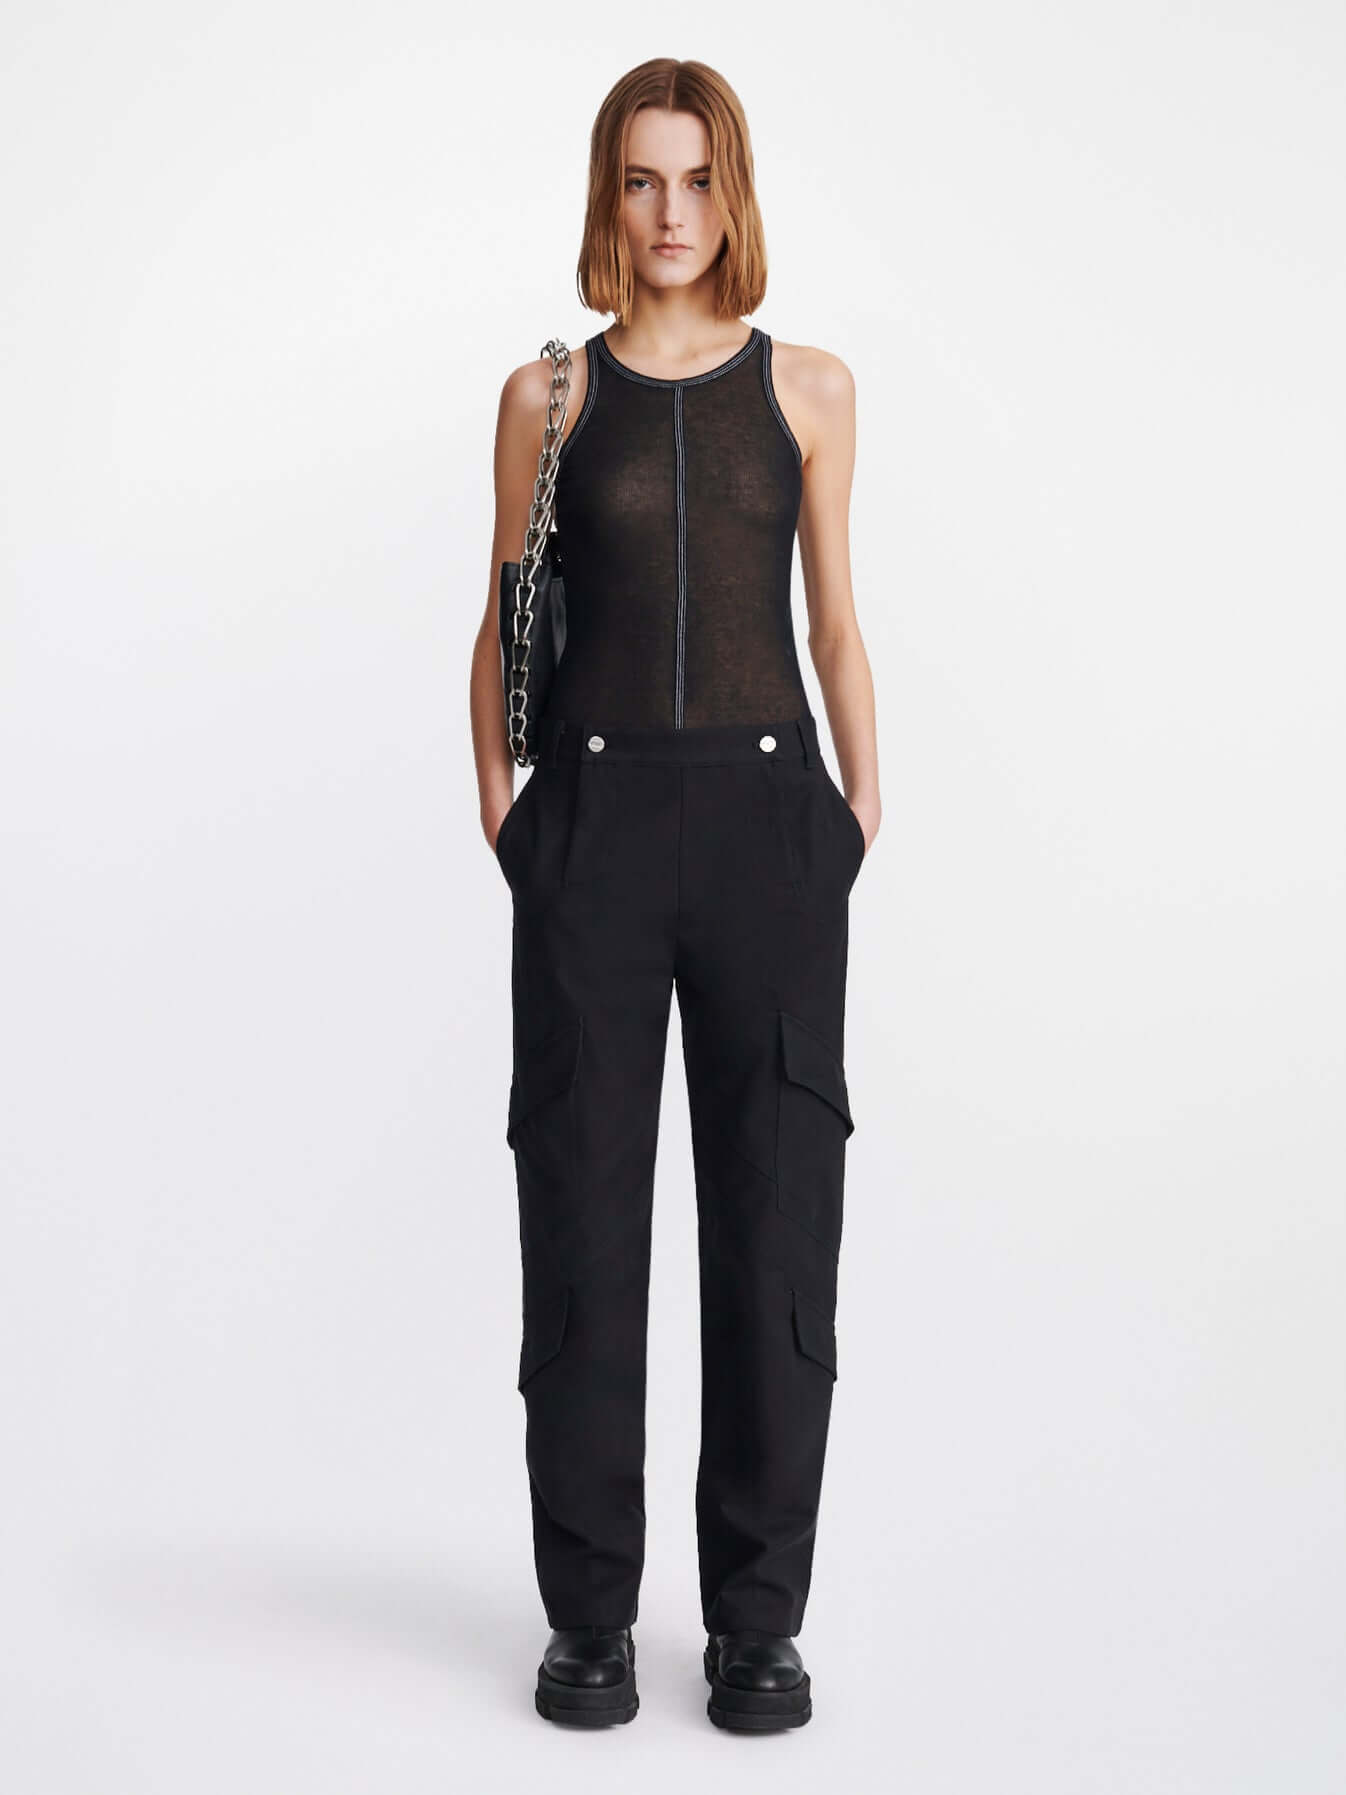 Dion Lee Triple Stitch Tank in Black available at TNT The New Trend Australia.